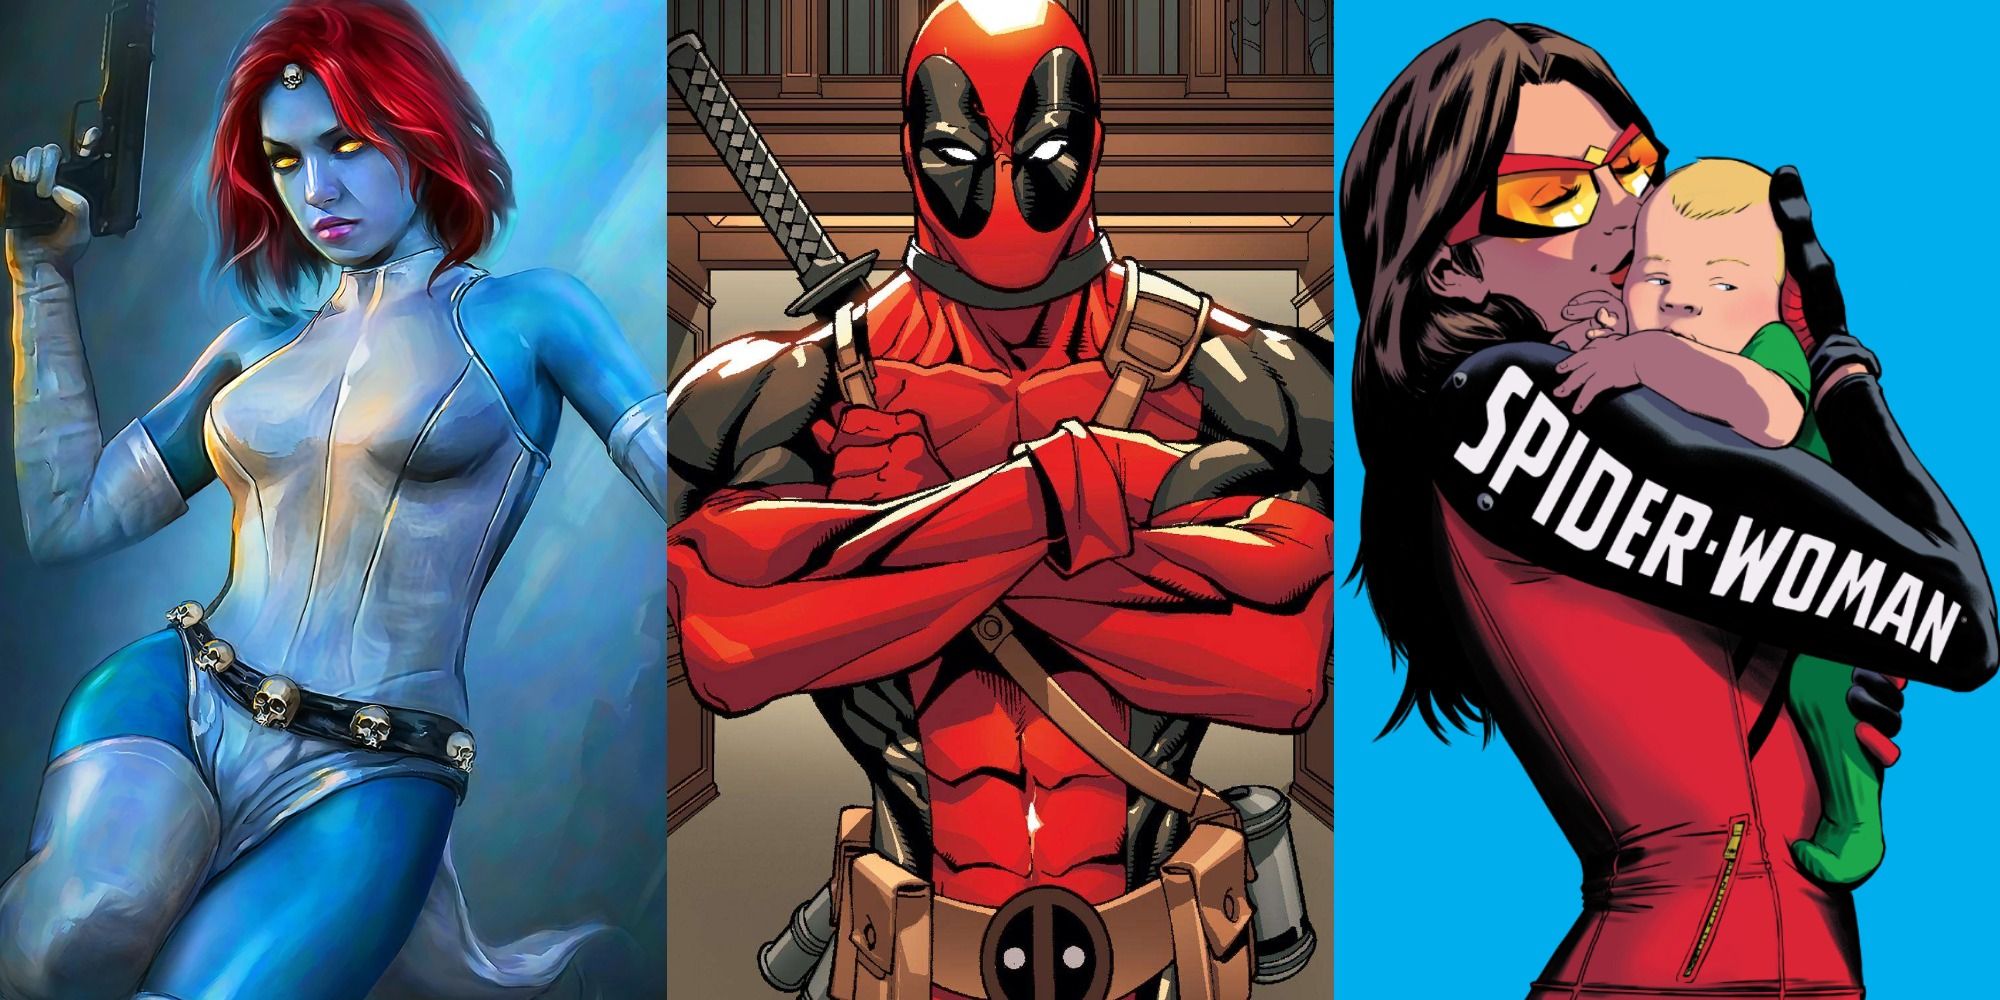 Side by side images of Mystique, Deadpool, and Spider-Woman holding her baby